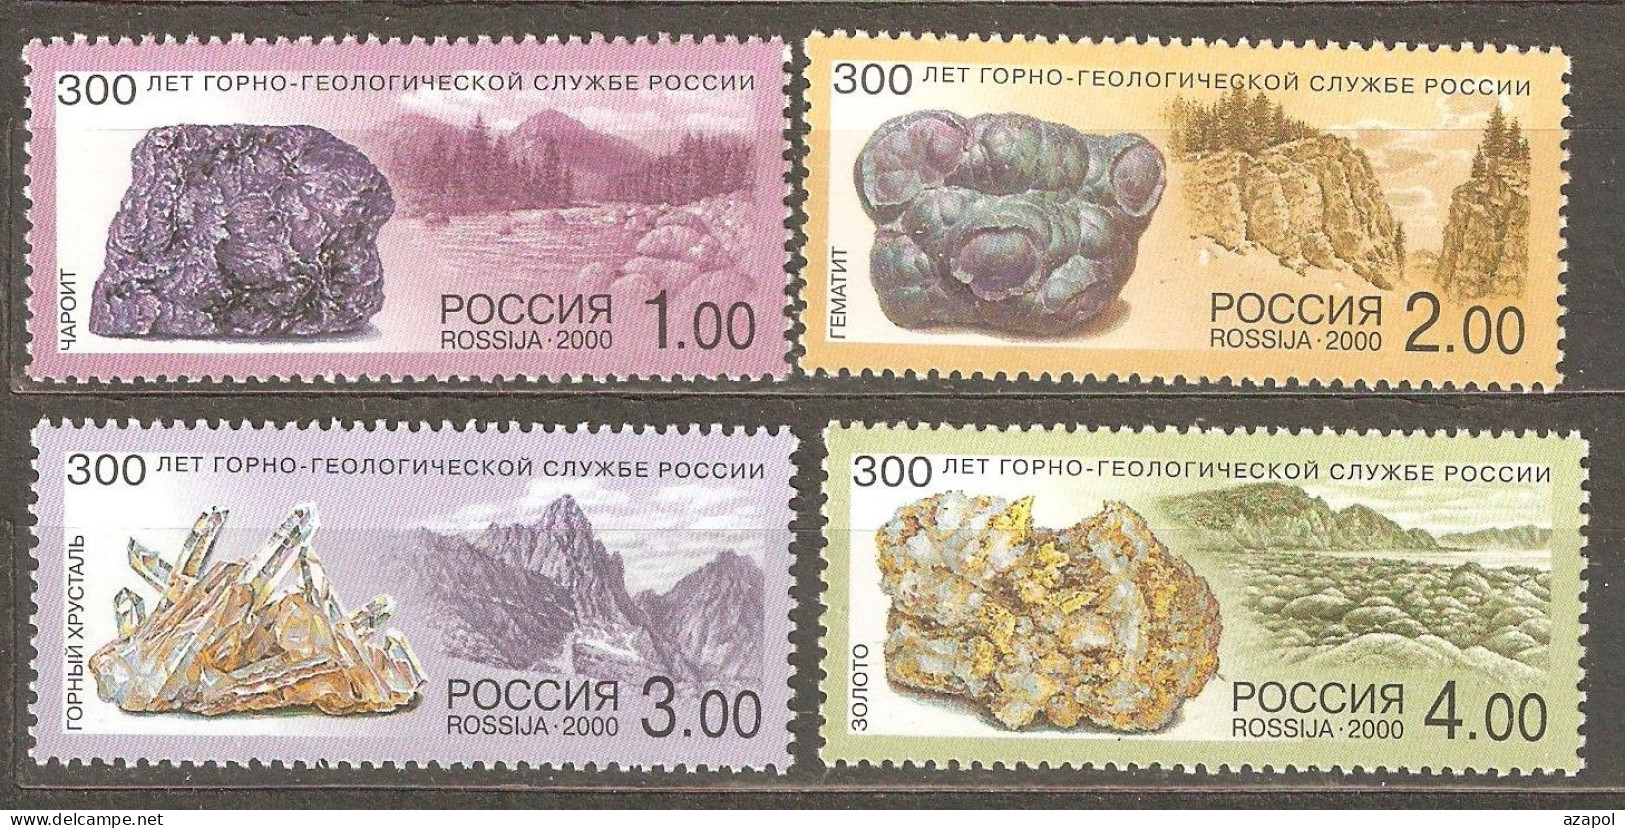 Russia: Full Set Of 4 Mint Stamps, 300 Years Of Rock-Geological Service, 2000, Mi#845-848, MNH - Minéraux